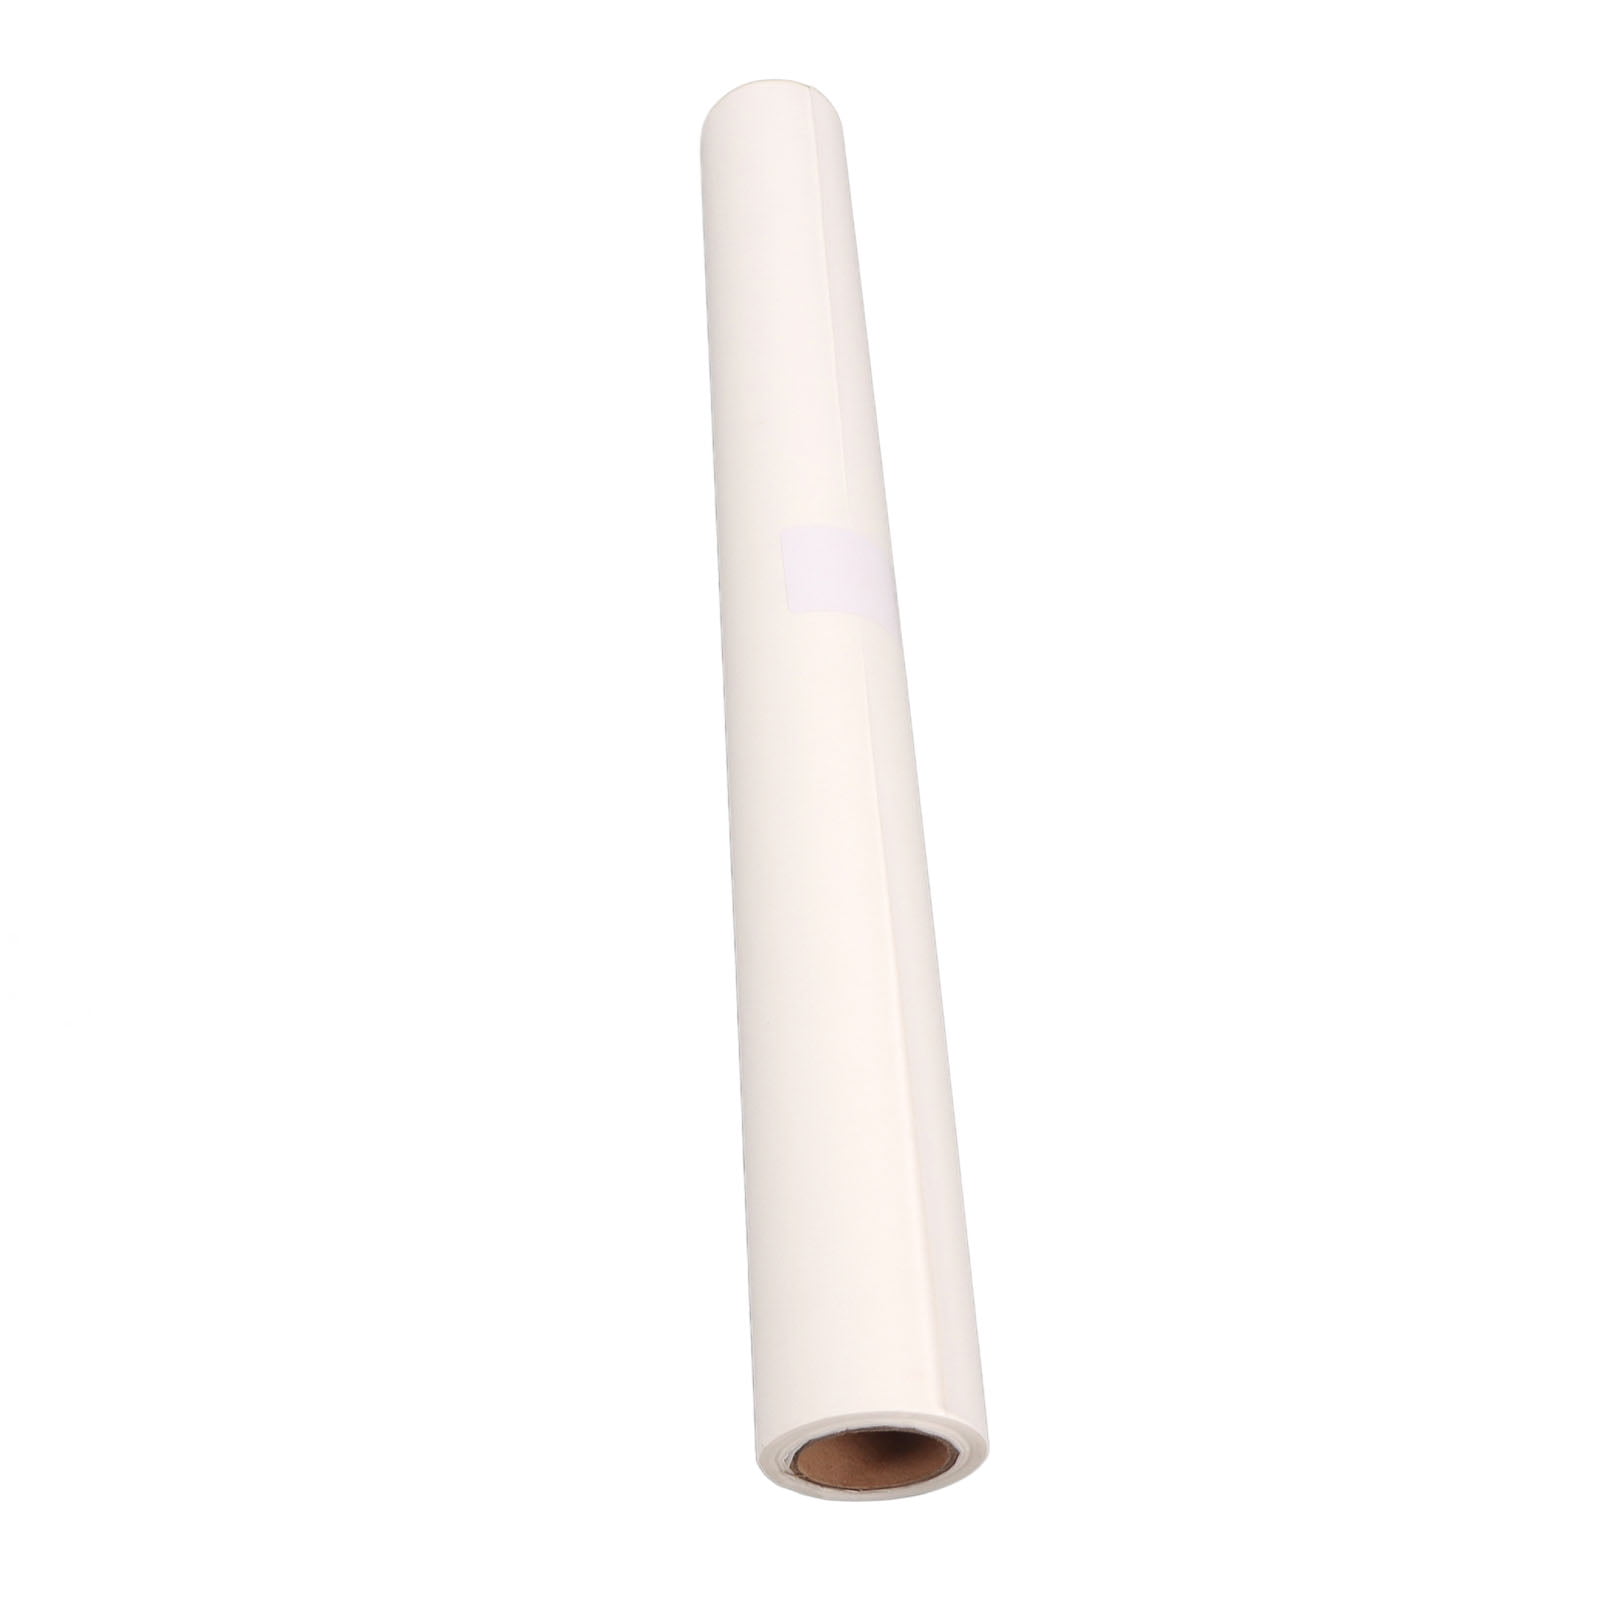 NEWEST Tracing Paper Roll White High Transparency Pattern Paper